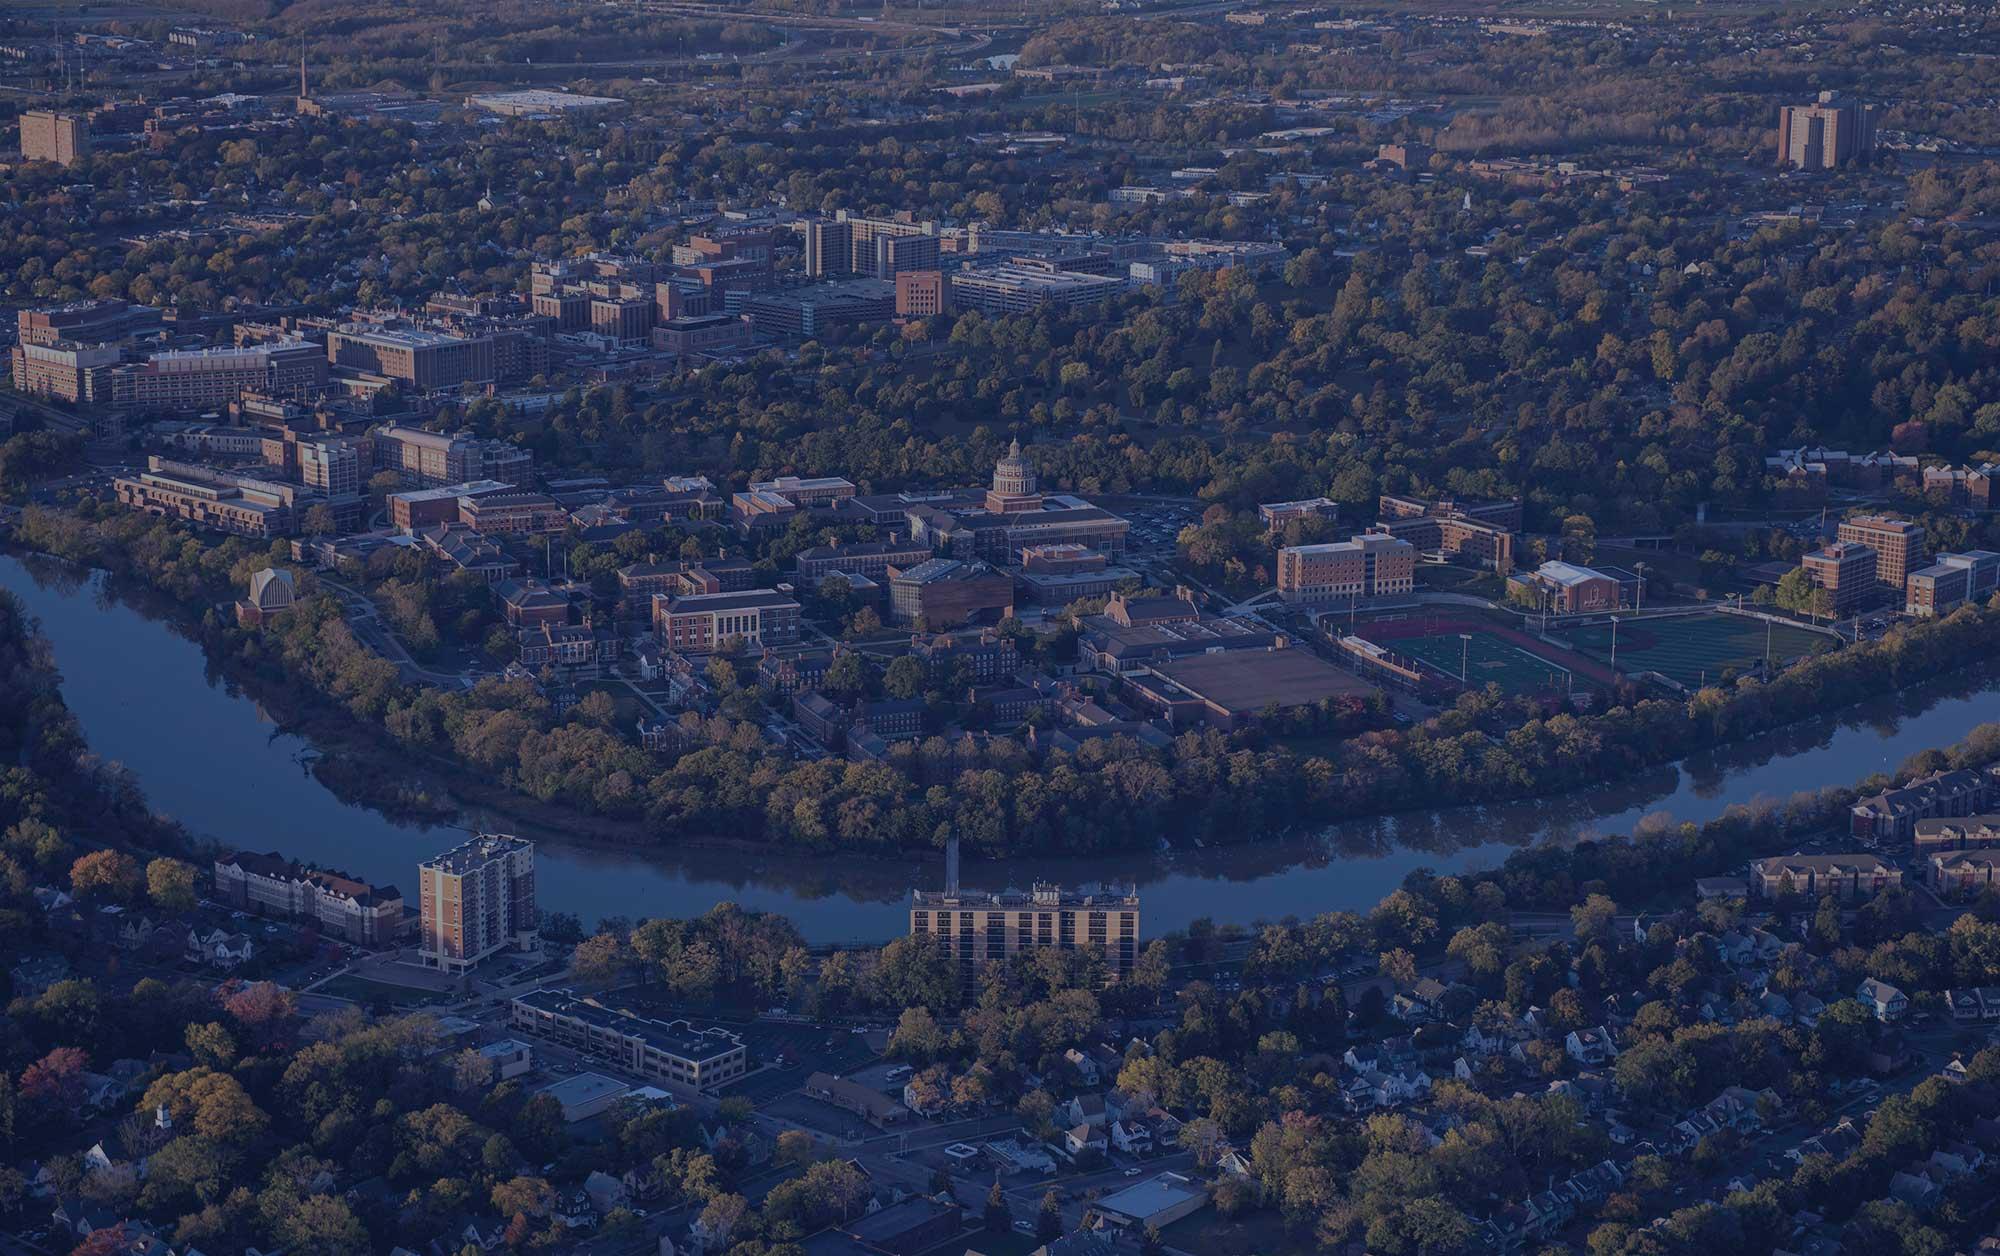 aerial image of the u of r campuses and genesee river with blue overlay